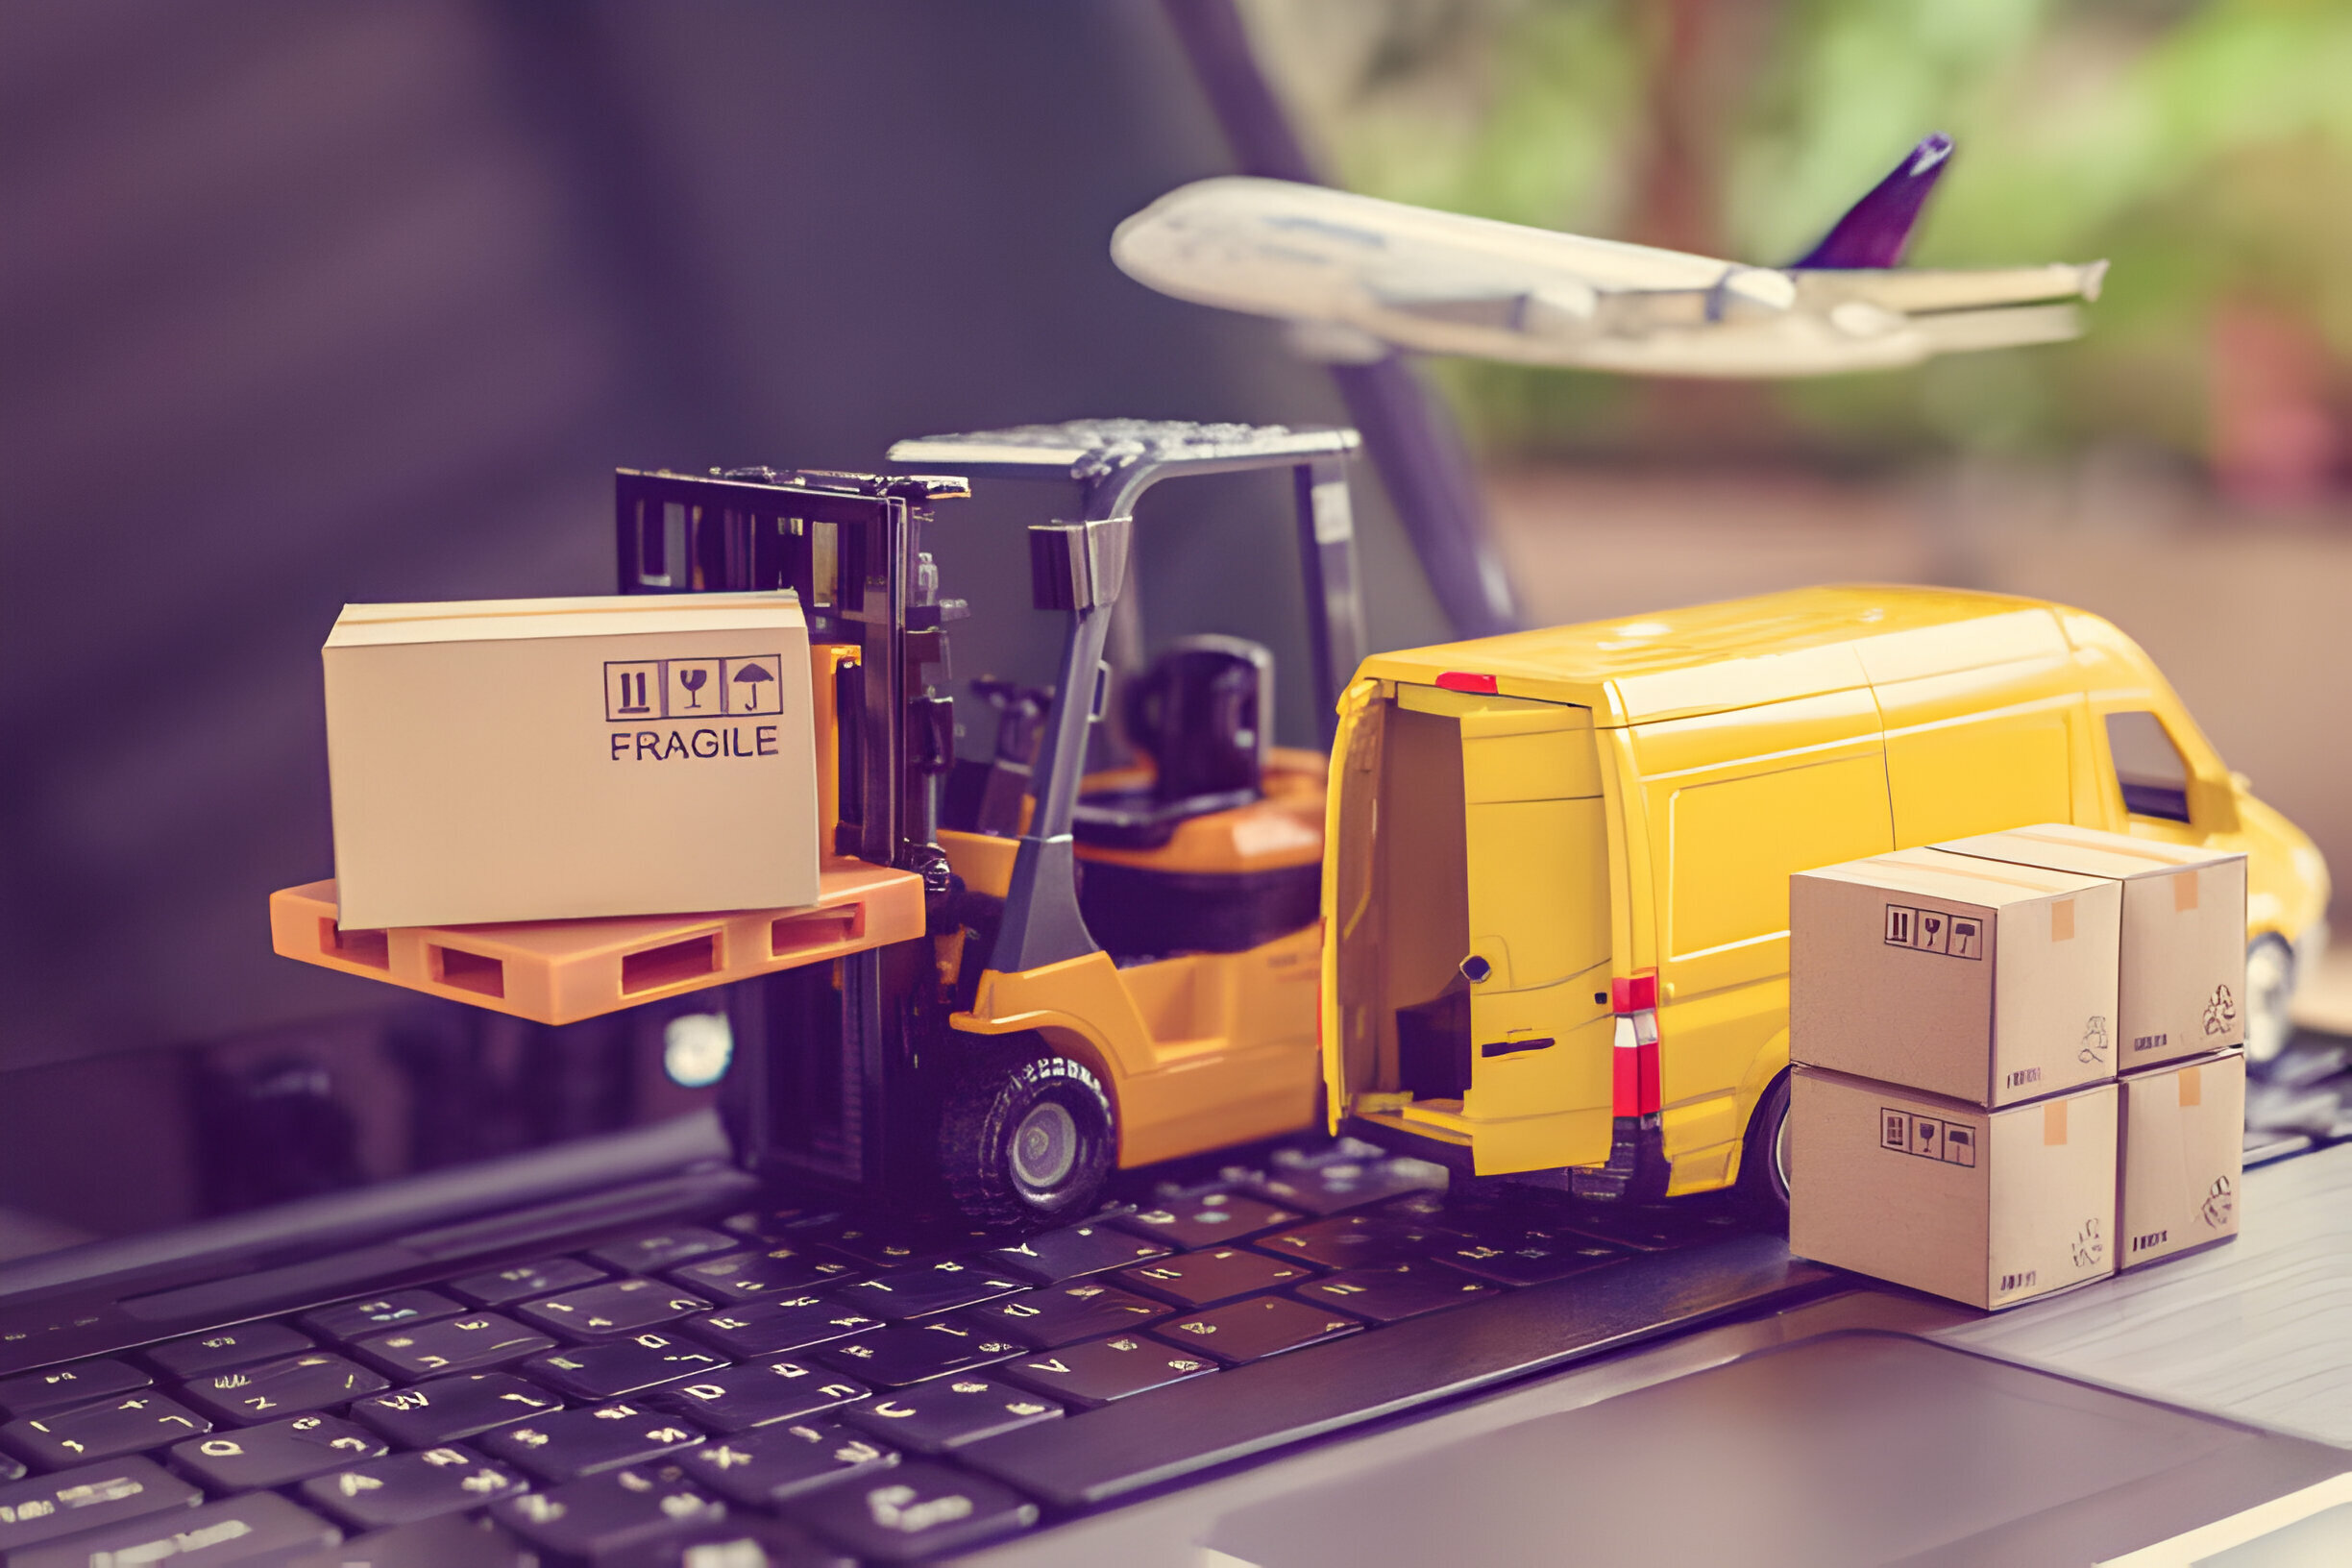 embedded insurance for logistics and mobility industries